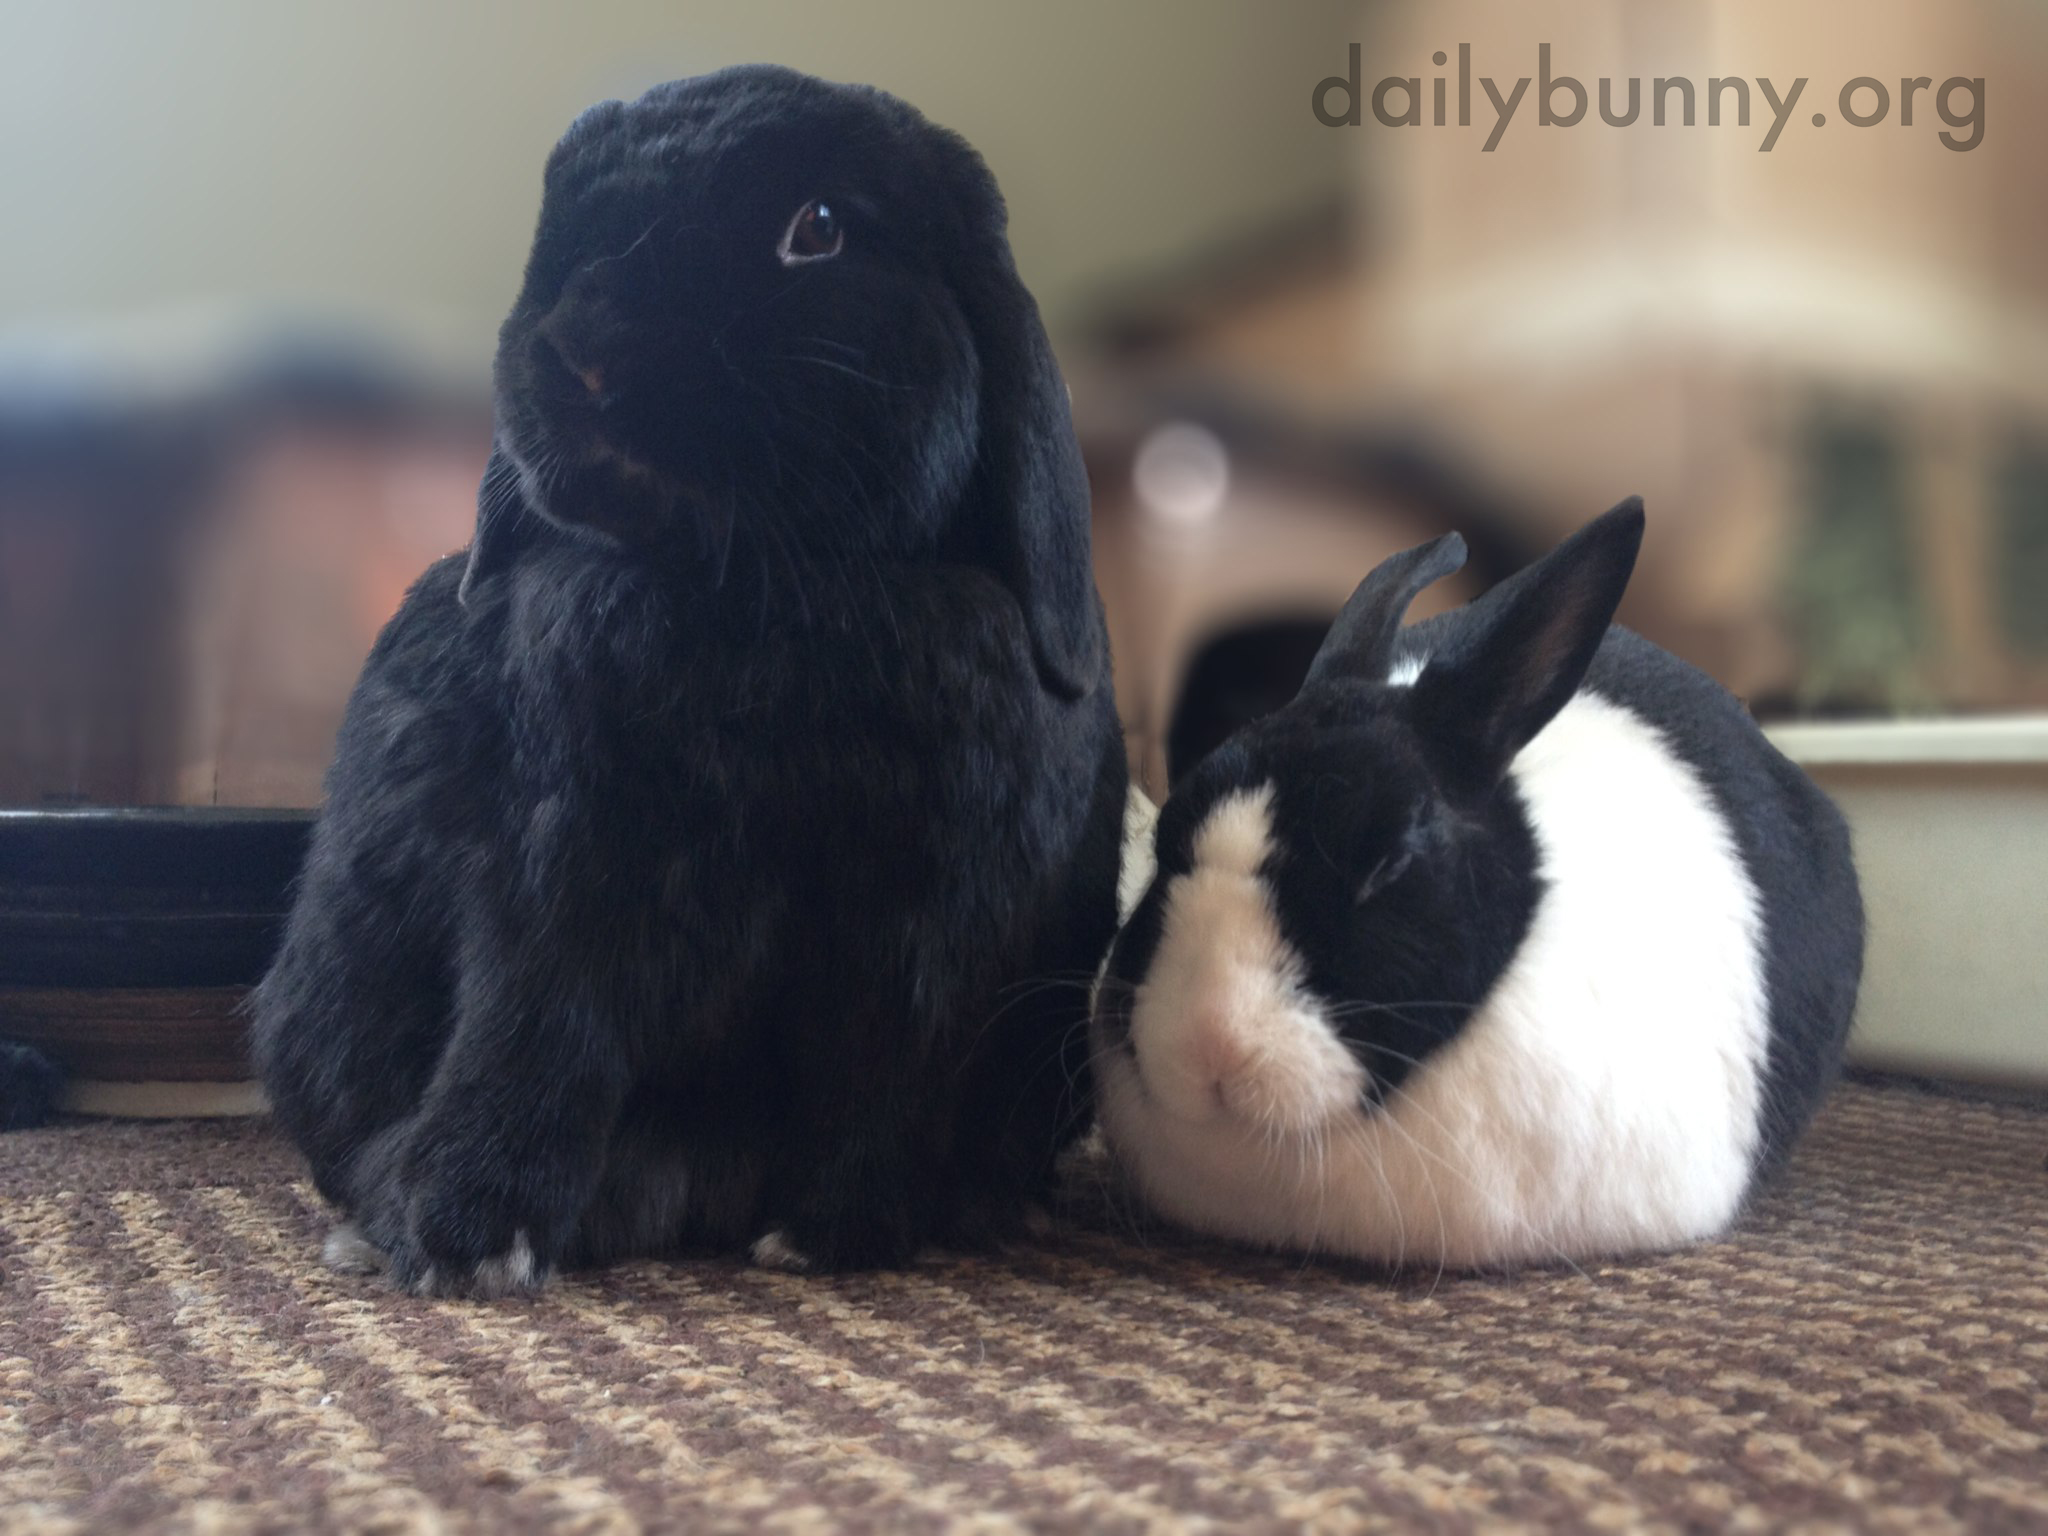 Bunny Friends Are So Fluffy and Round 1